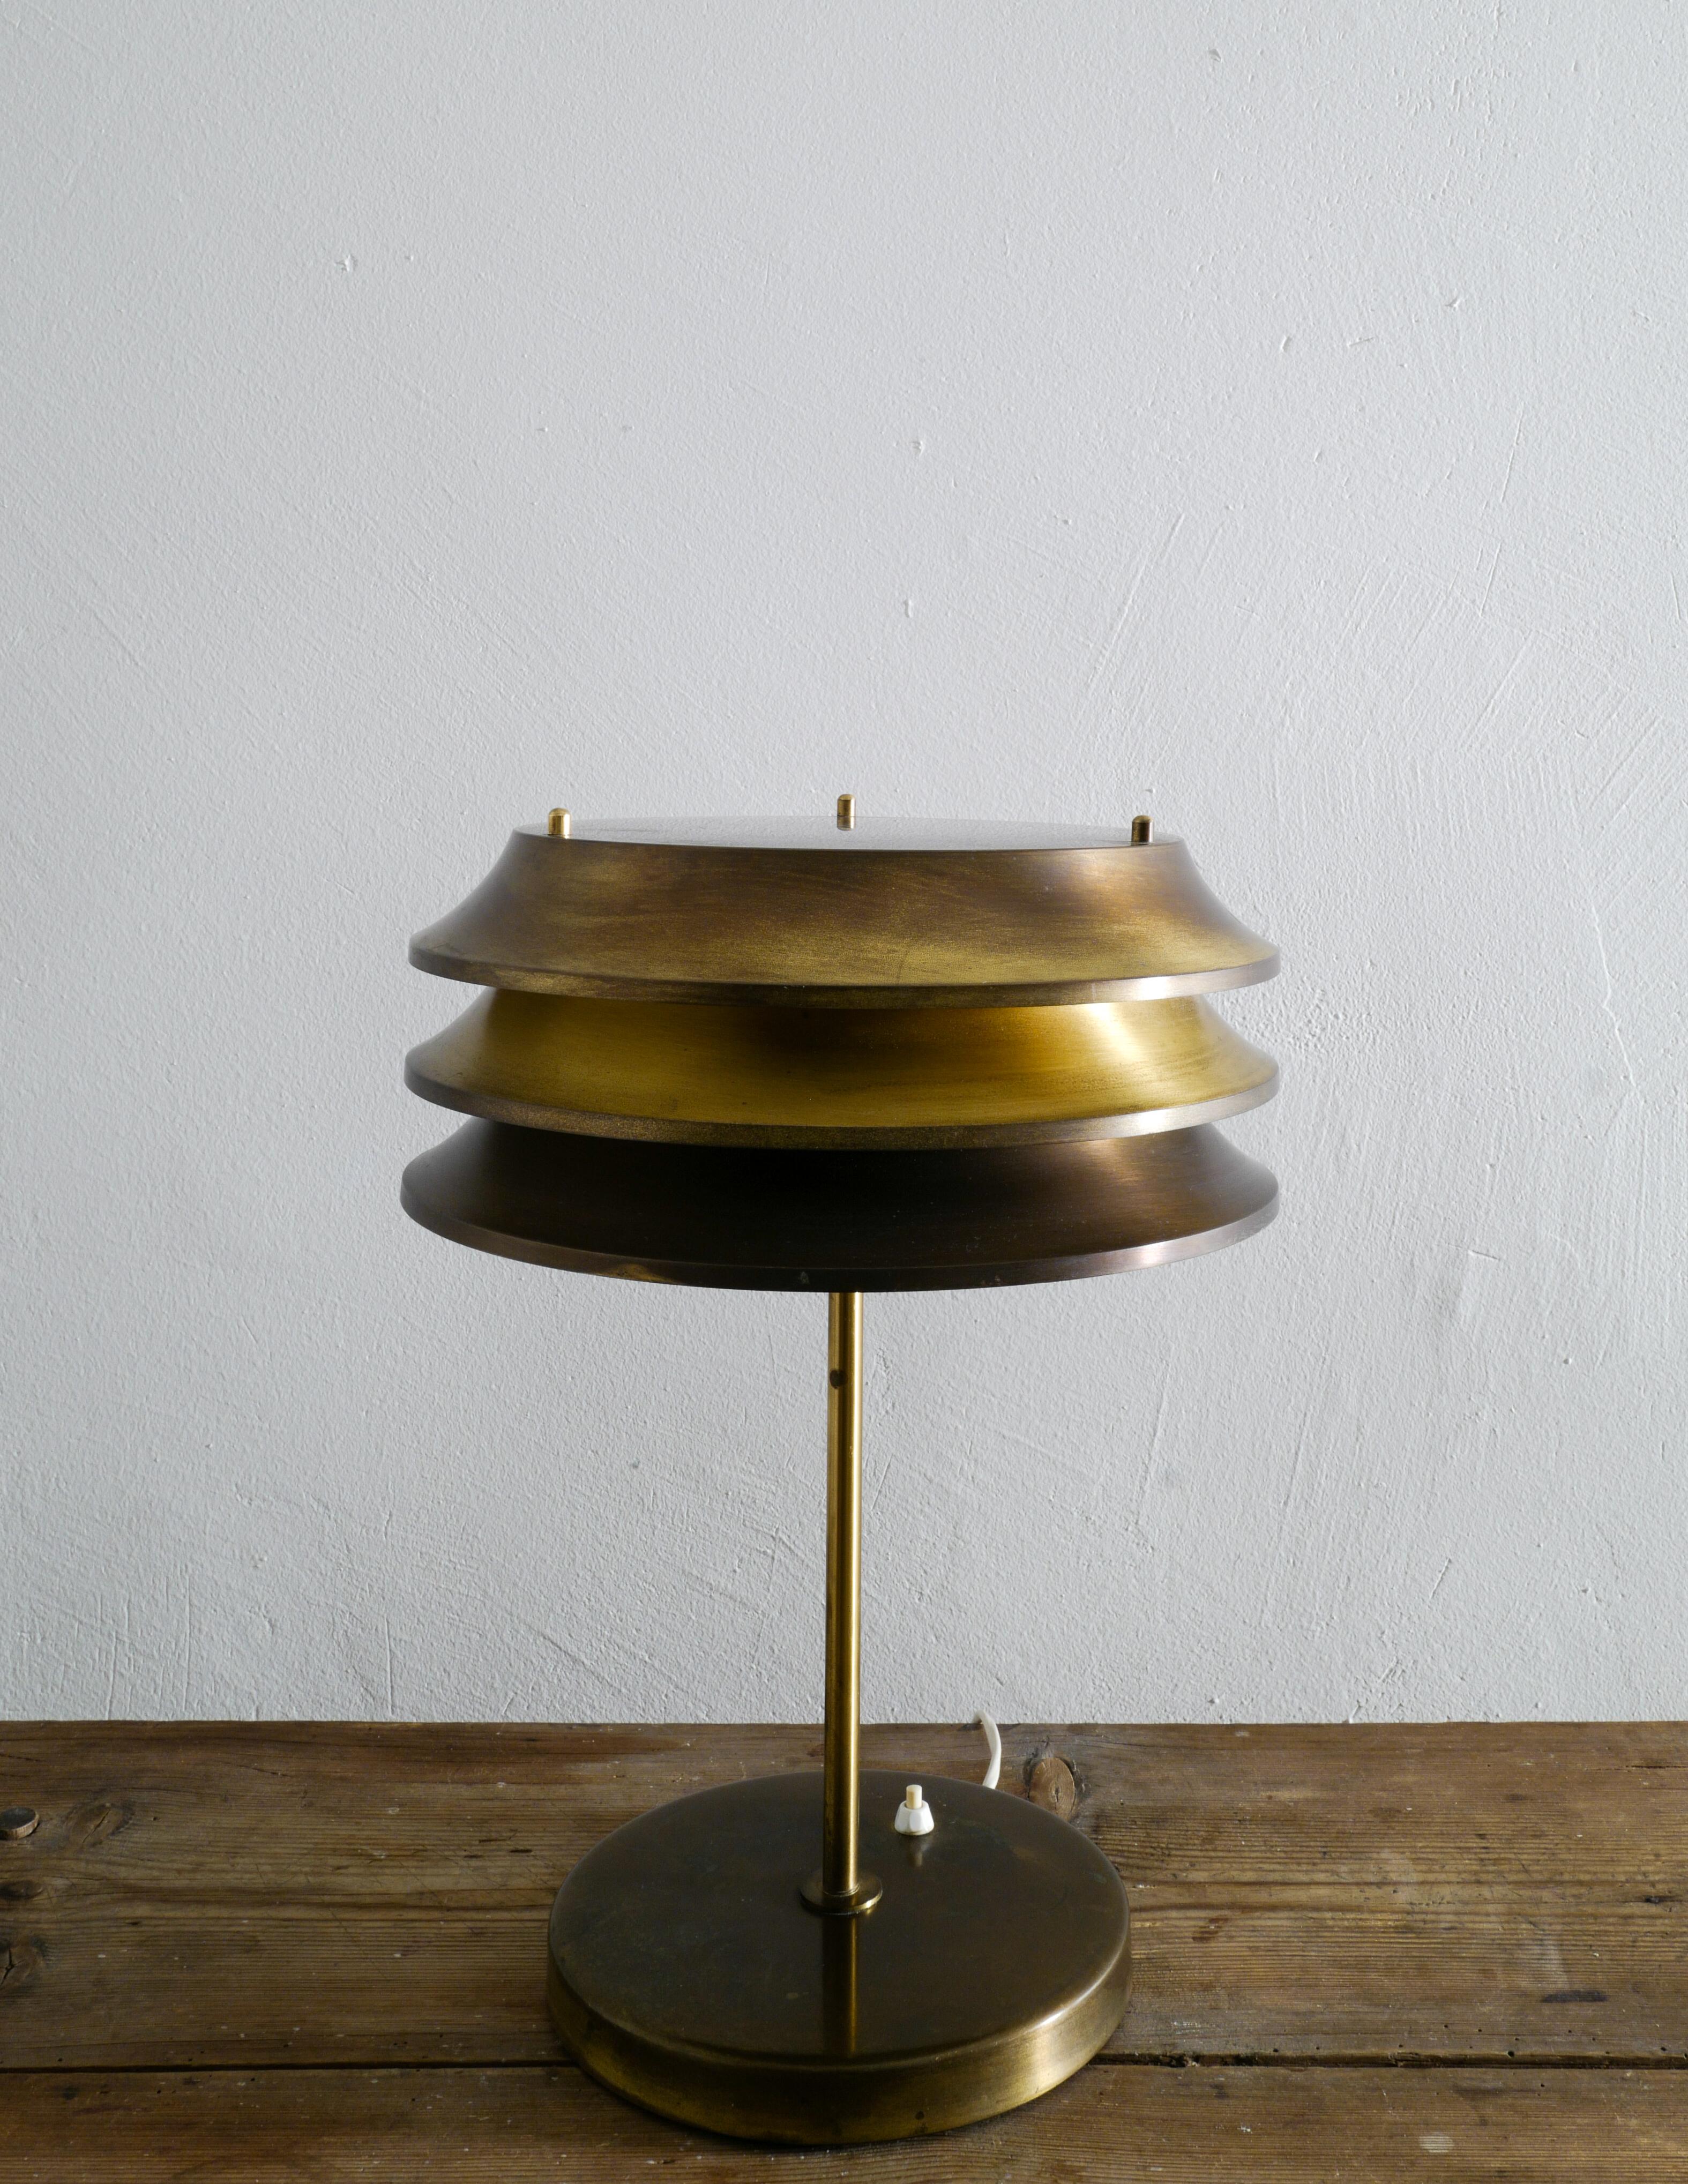 Very rare table lamp in brass designed by Kai Ruokonen and produced by Orno Oy in Finland during the 1970s. In good original vintage condition showing beautiful patina from use and age.